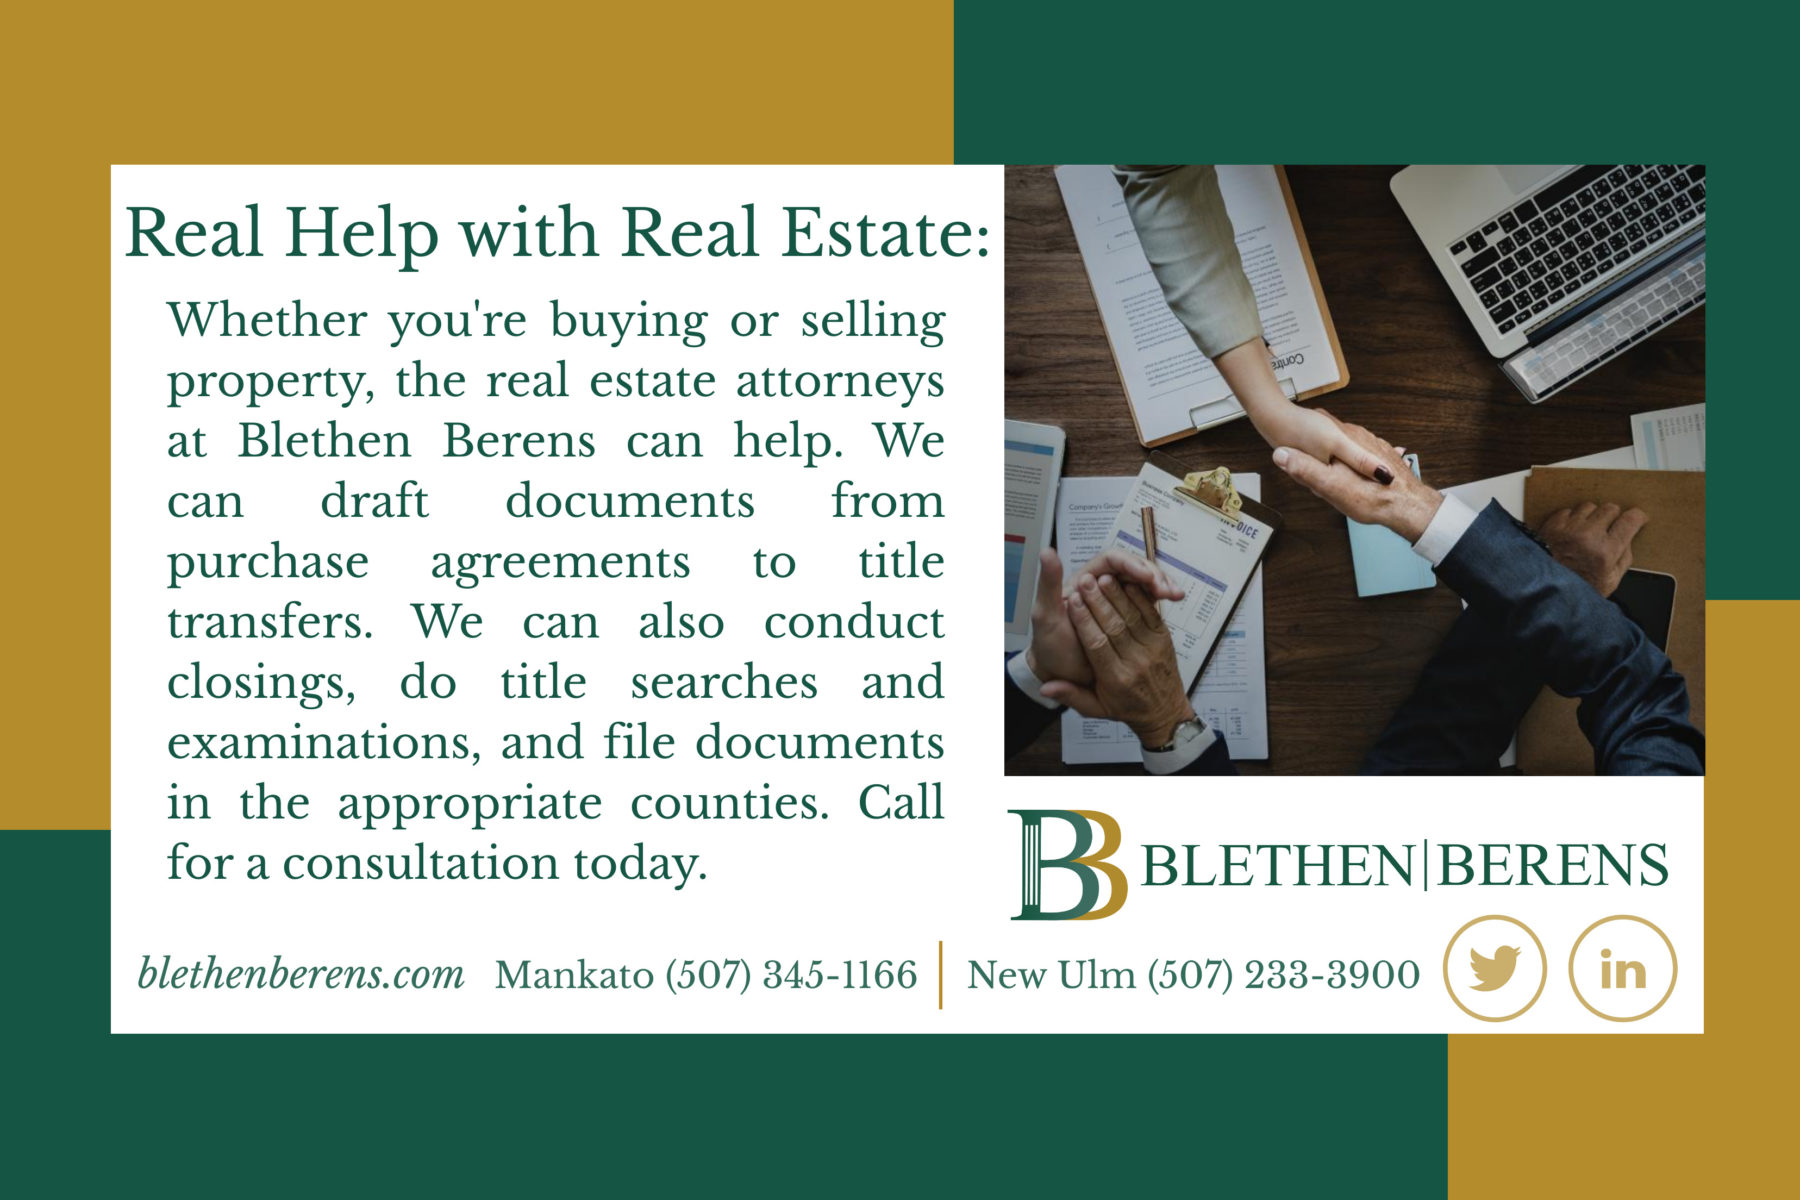 Whether you're buying or selling property, the real estate attorneys at Blethen Berens can help. We can draft documents from purchase agreements to title transfers. We can also conduct closings, do title searches and examinations, and file documents in appropriate counties. Call for a consultation today. Photo of two people shaking hands over business documents while another person claps.